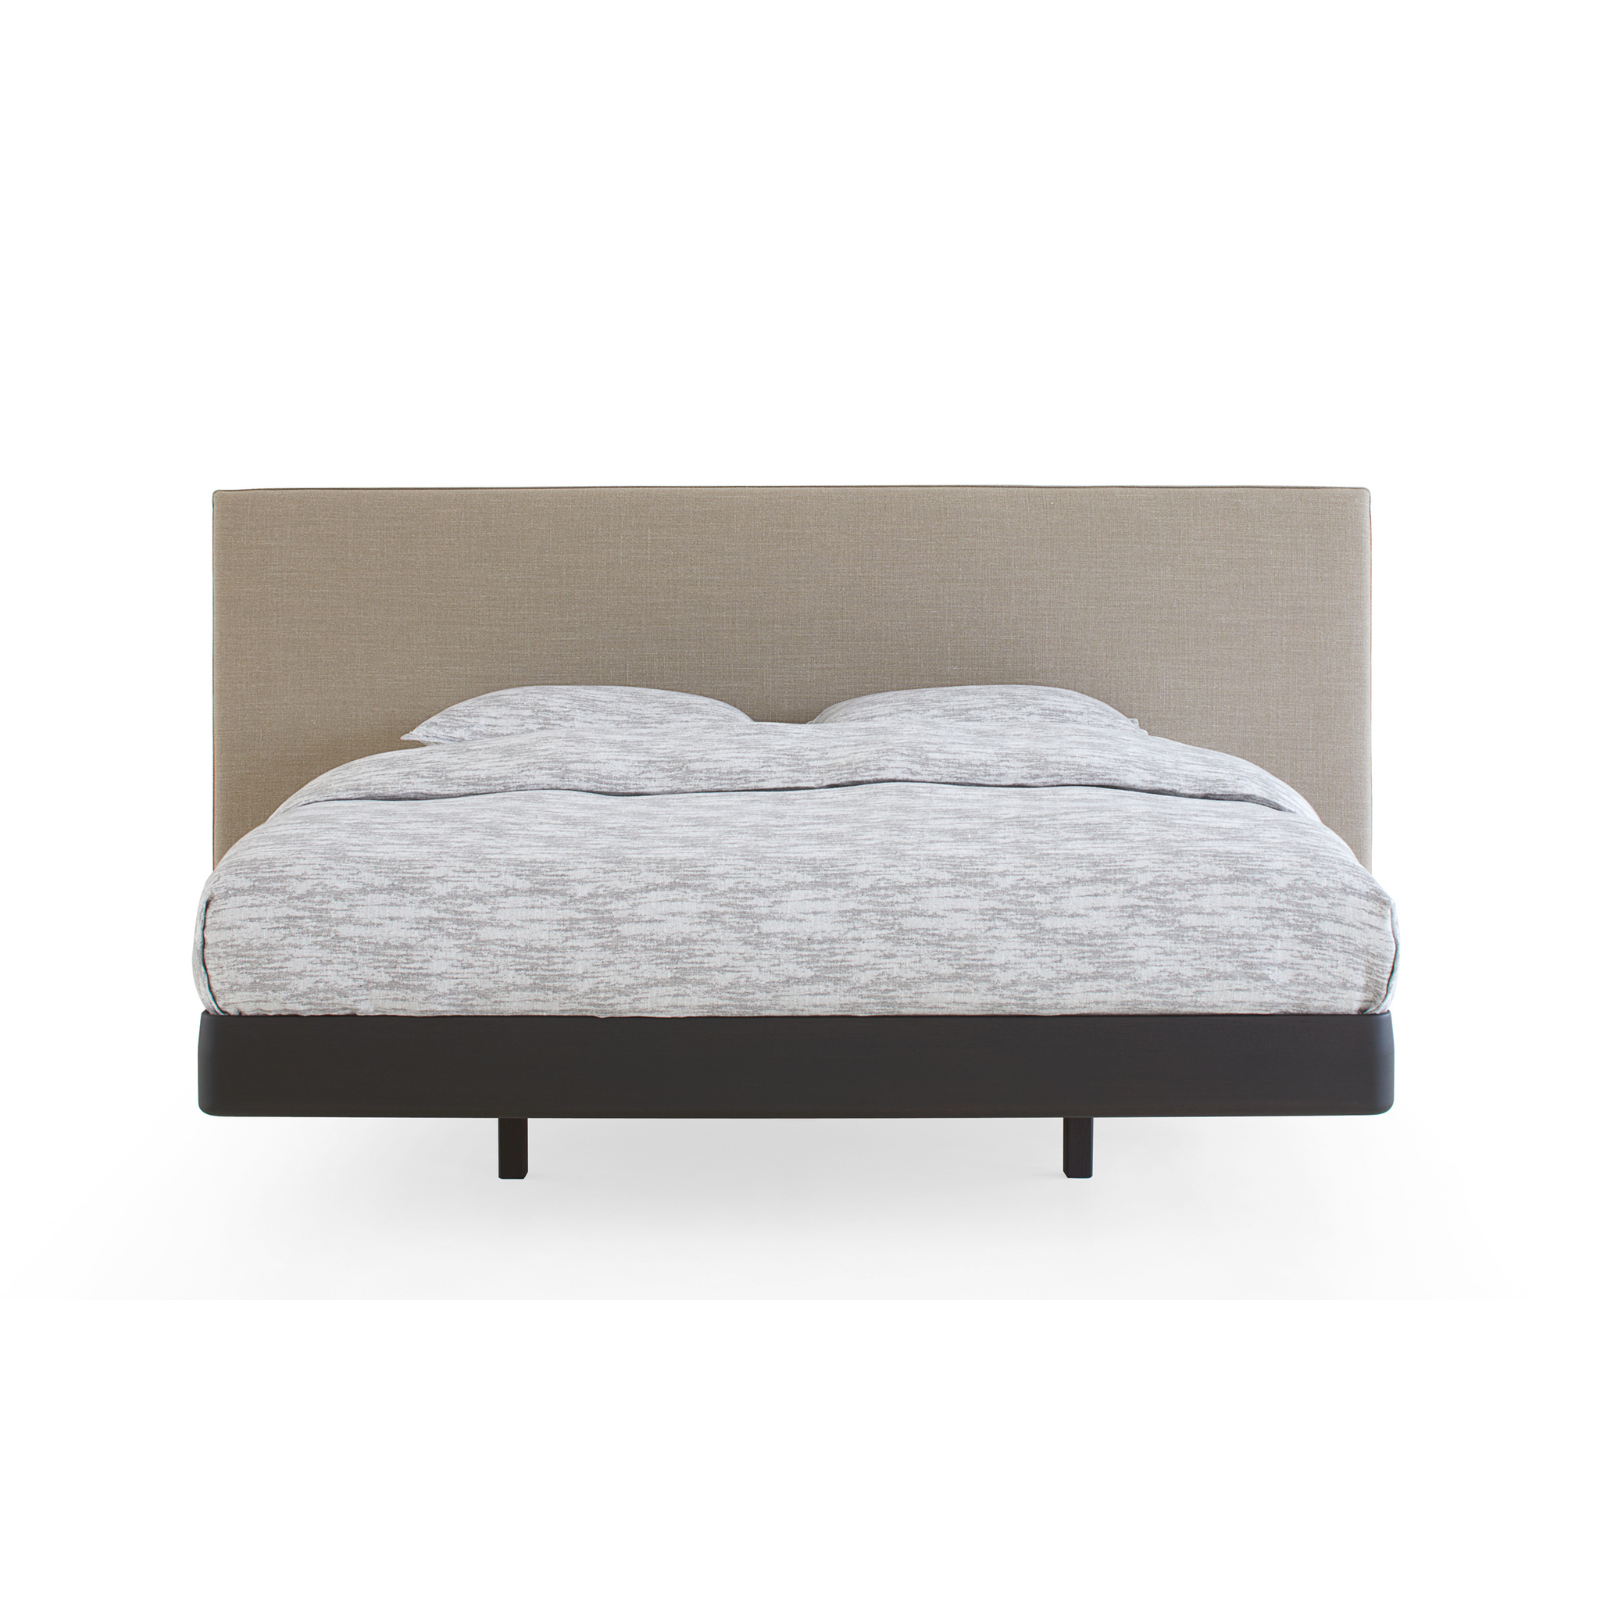 Blow with PROFILE headboard | Bed